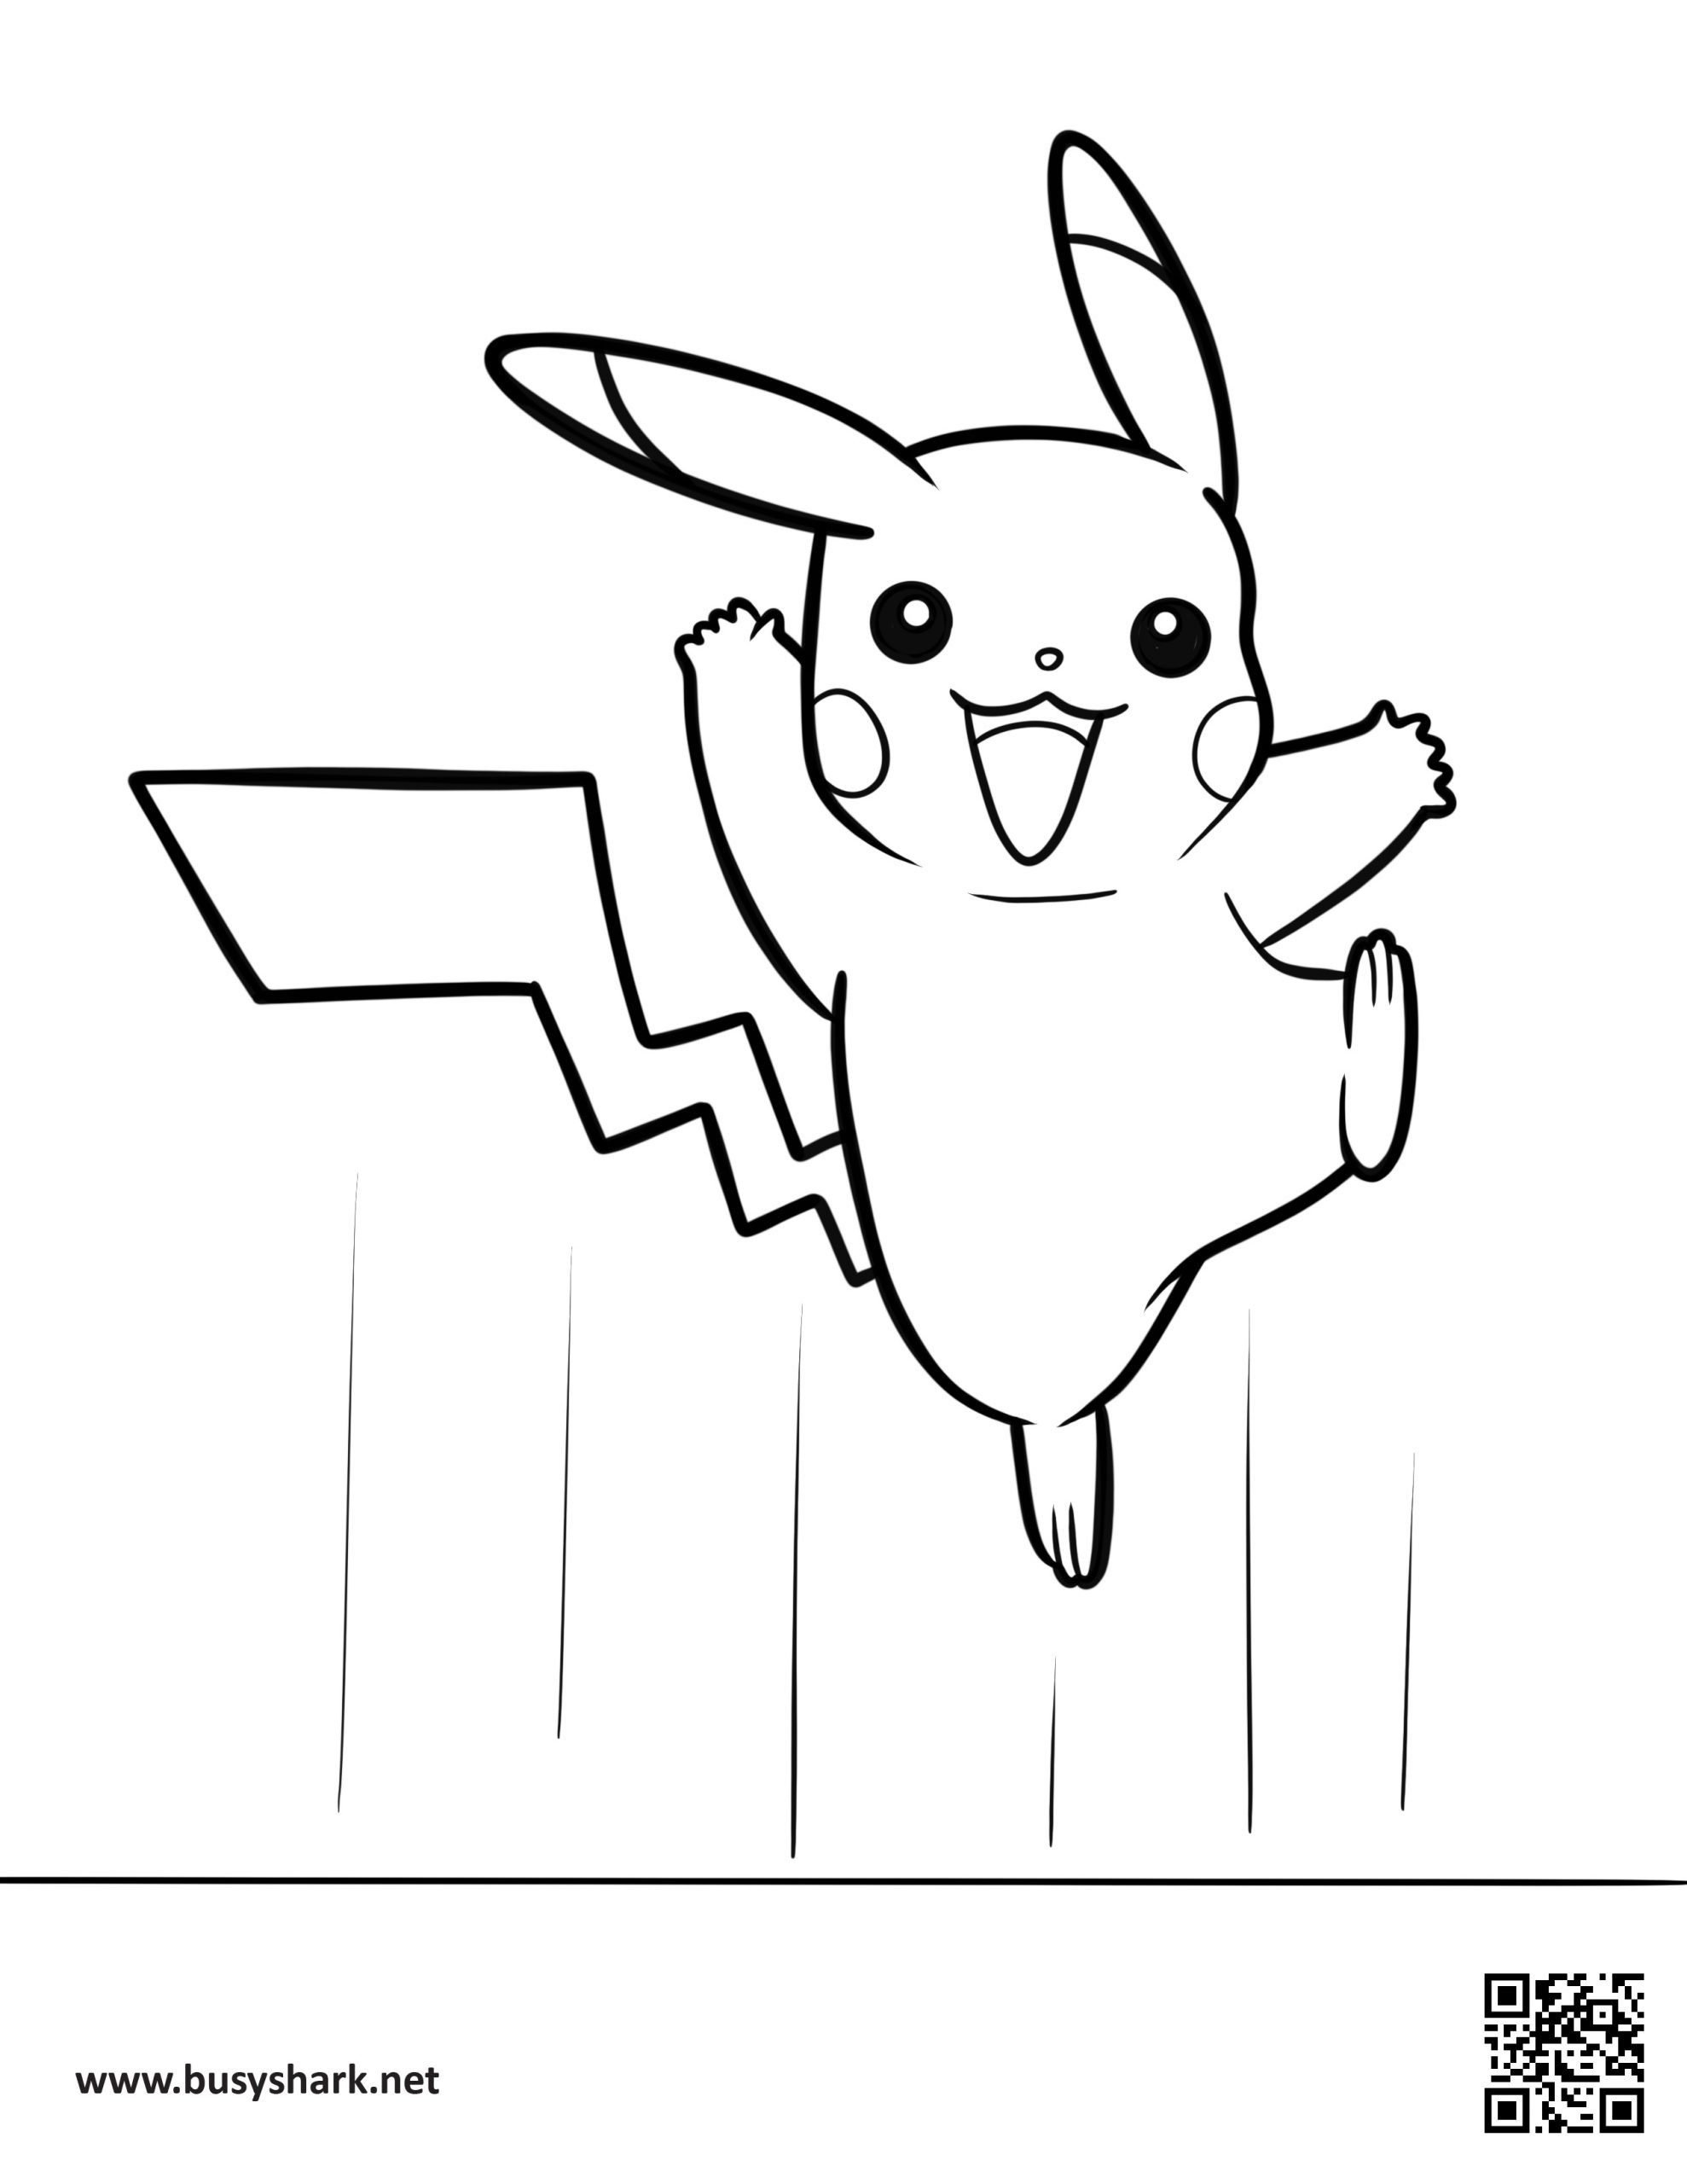 Pikachu coloring page